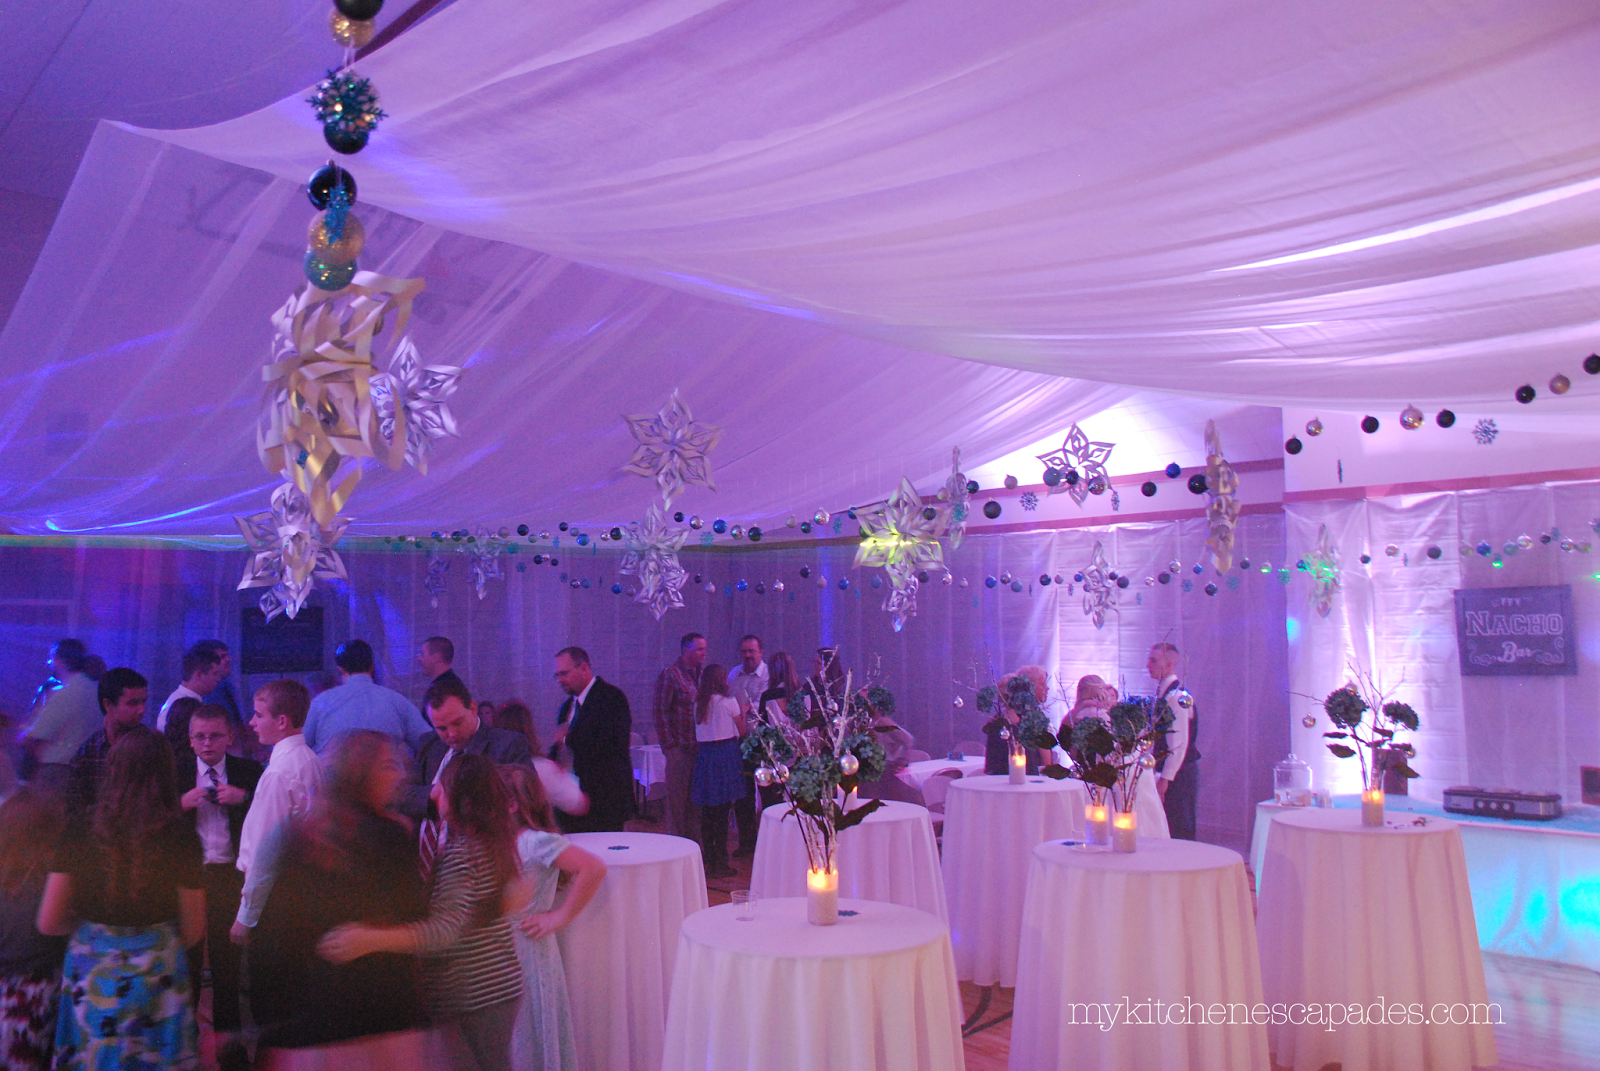 How to drape material for a wedding ceiling